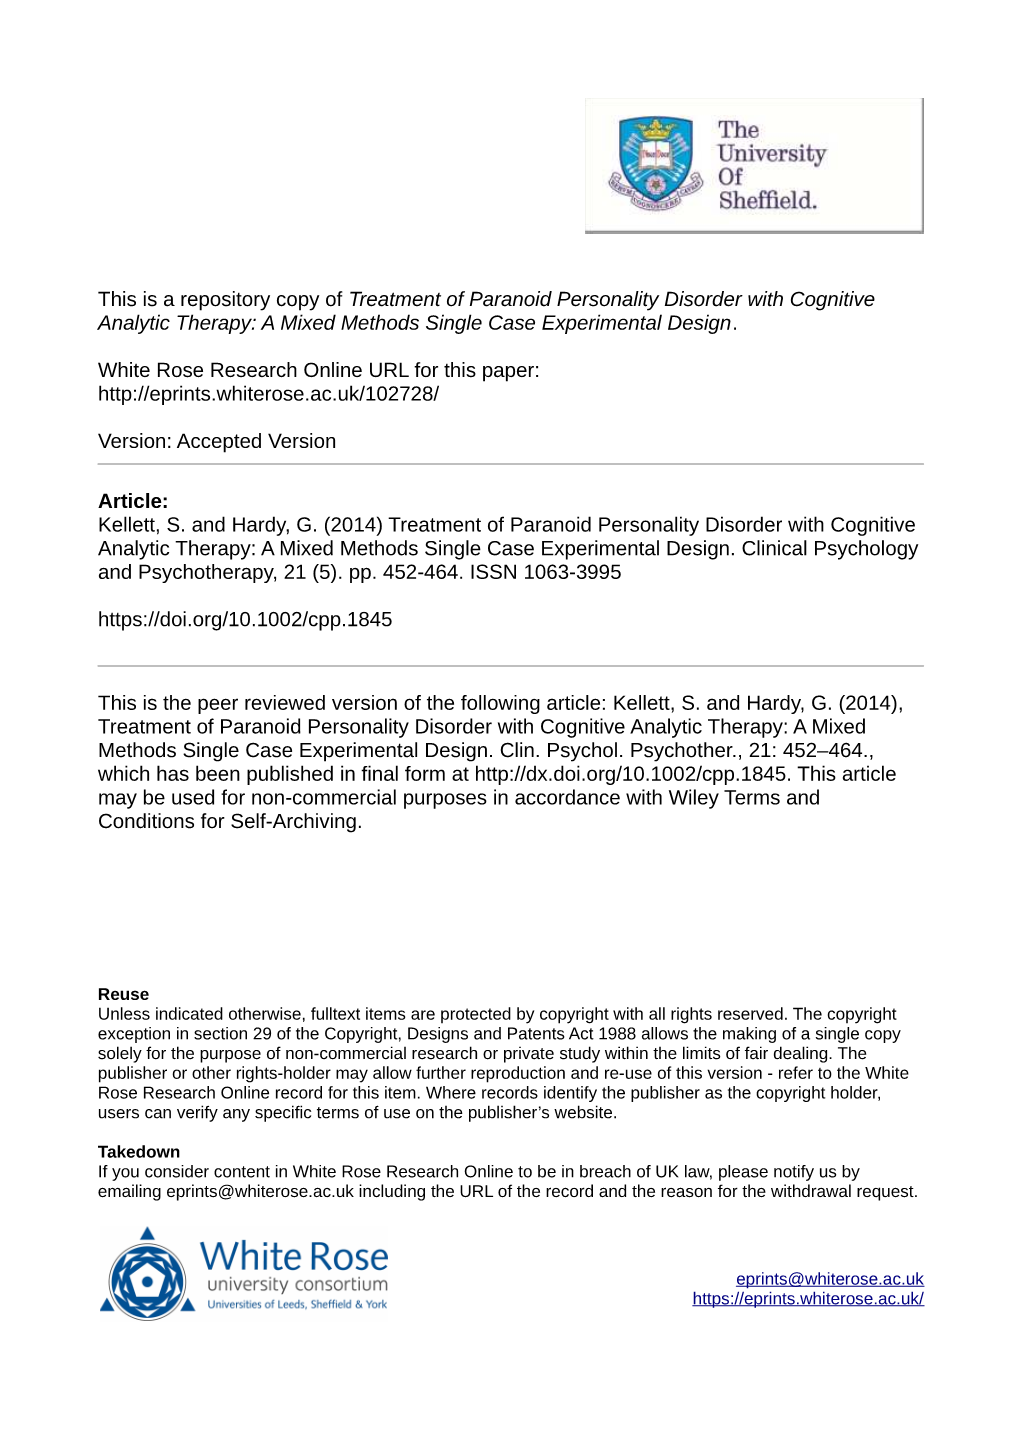 Treatment of Paranoid Personality Disorder with Cognitive Analytic Therapy: a Mixed Methods Single Case Experimental Design